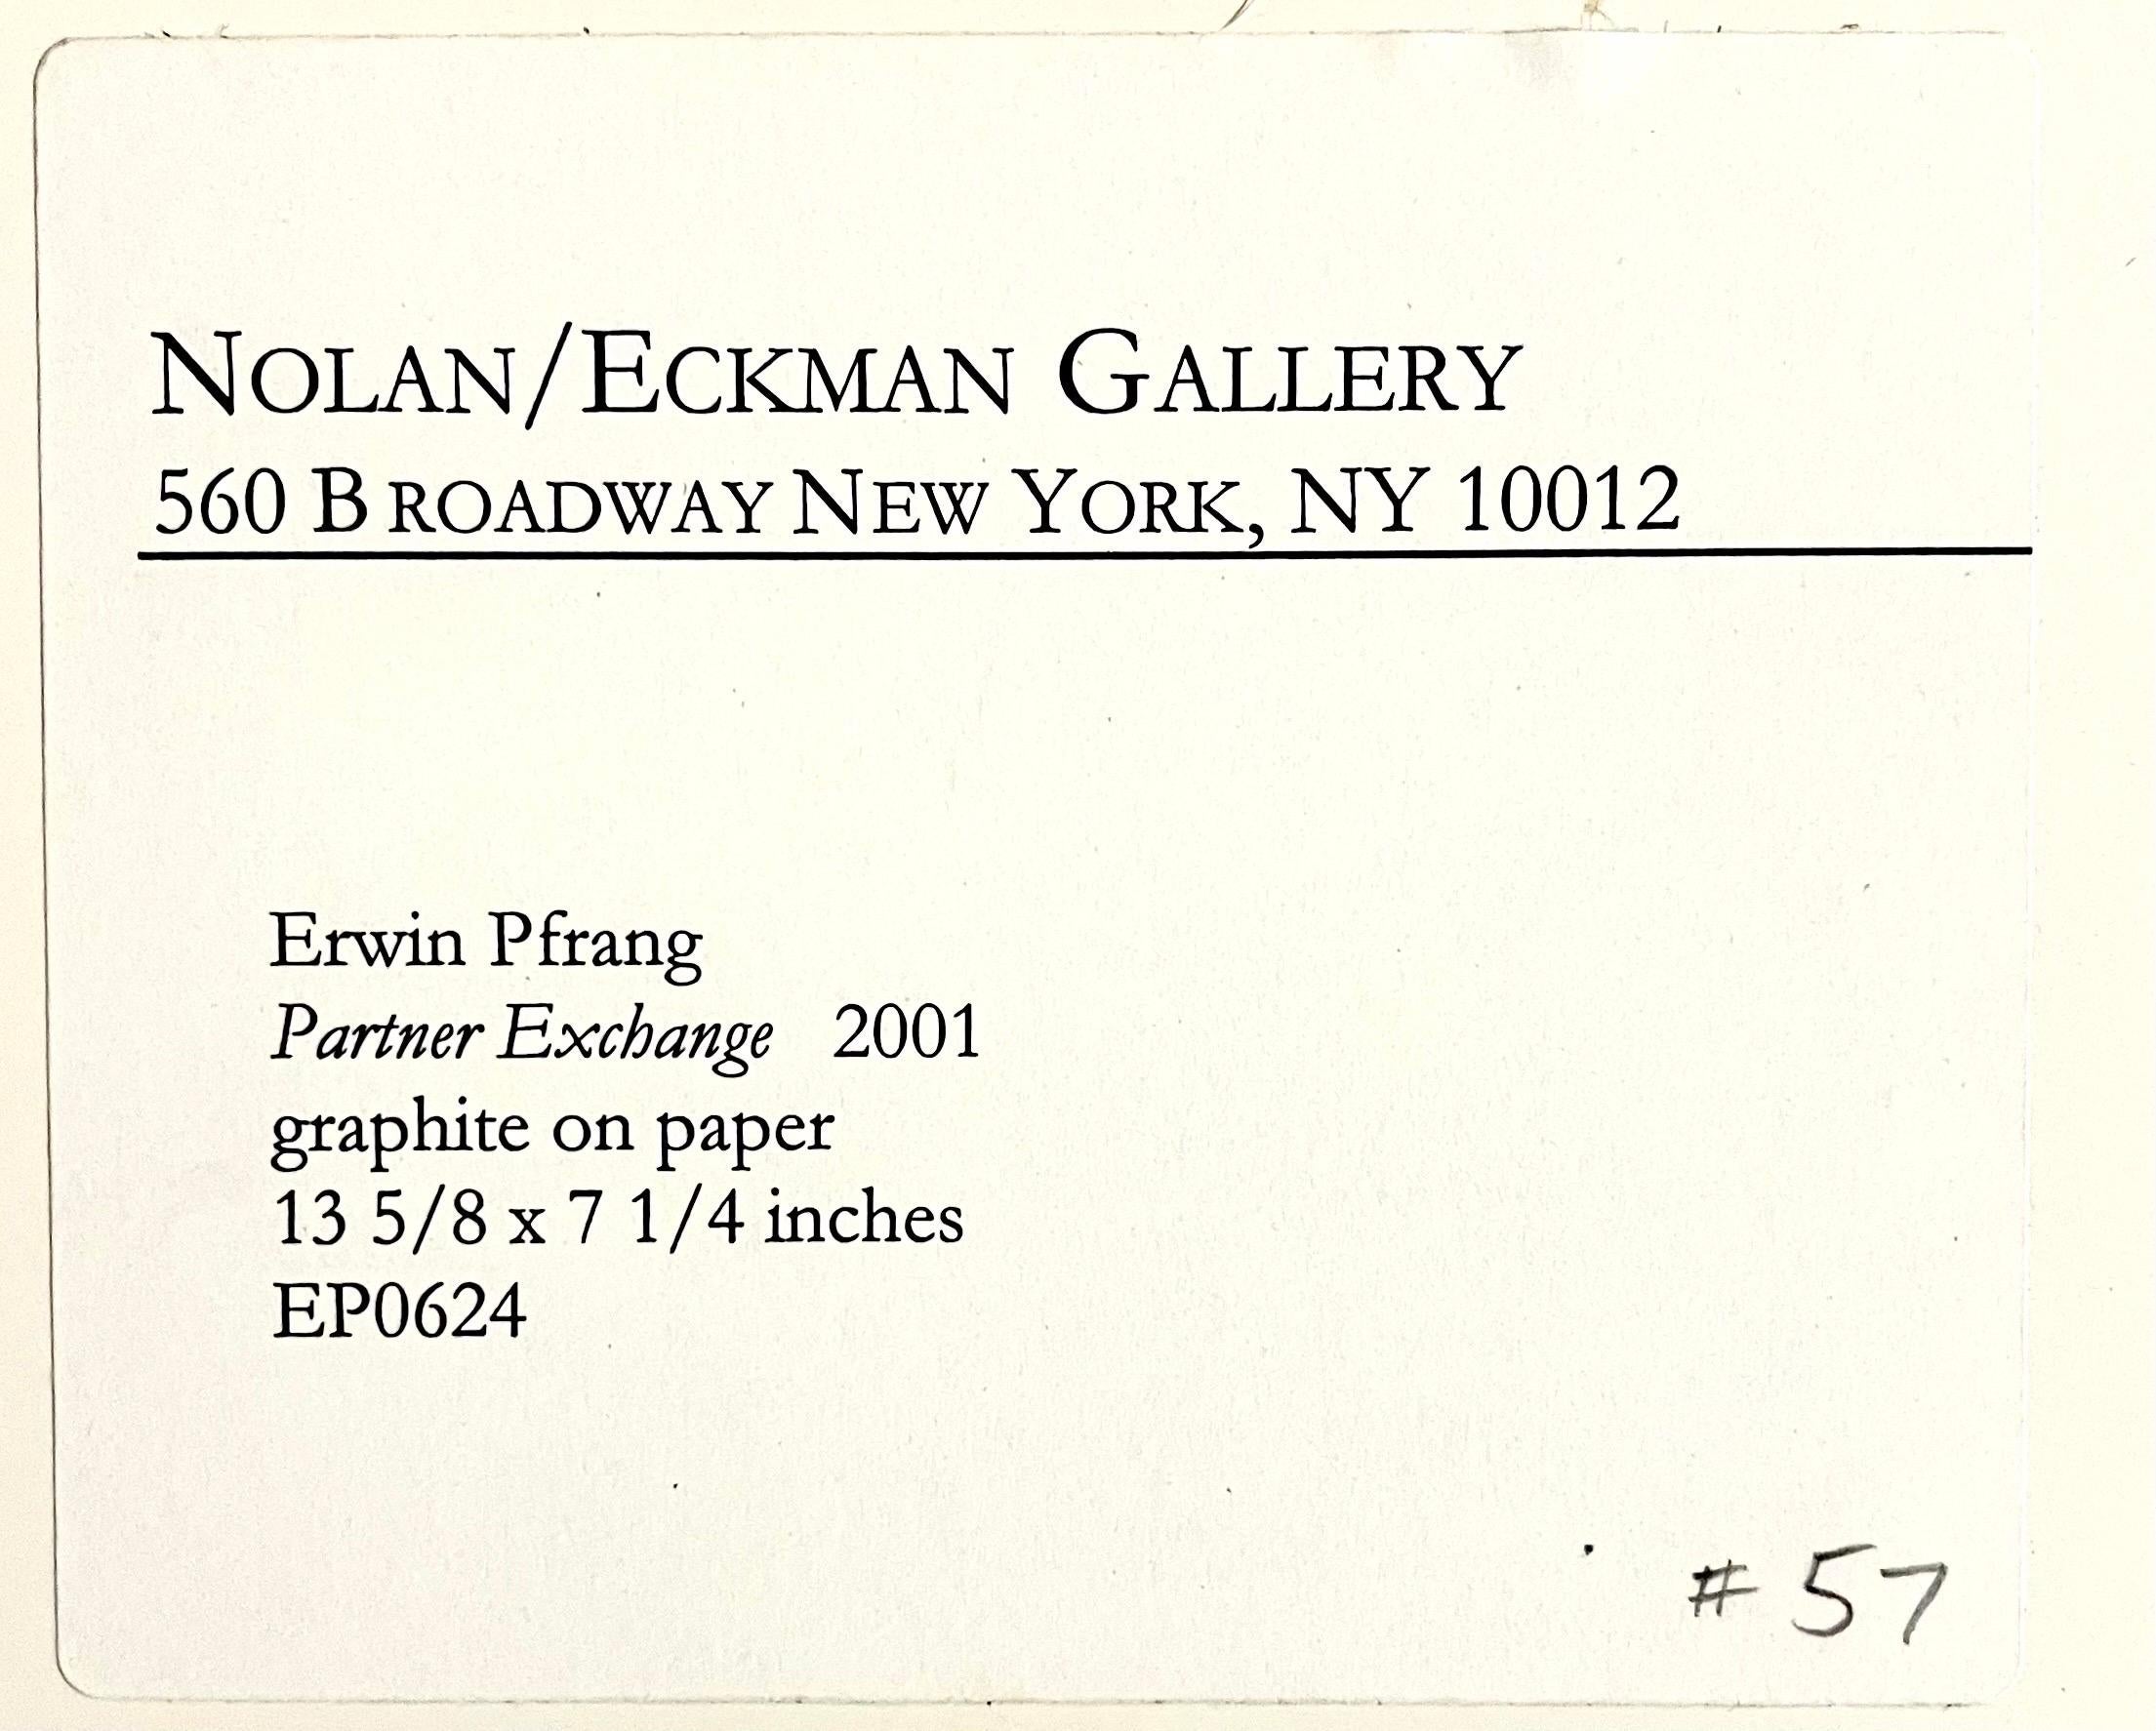 German Neo Expressionist Graphite Drawing Erwin Pfrang Nolan Eckman Gallery NYC For Sale 2